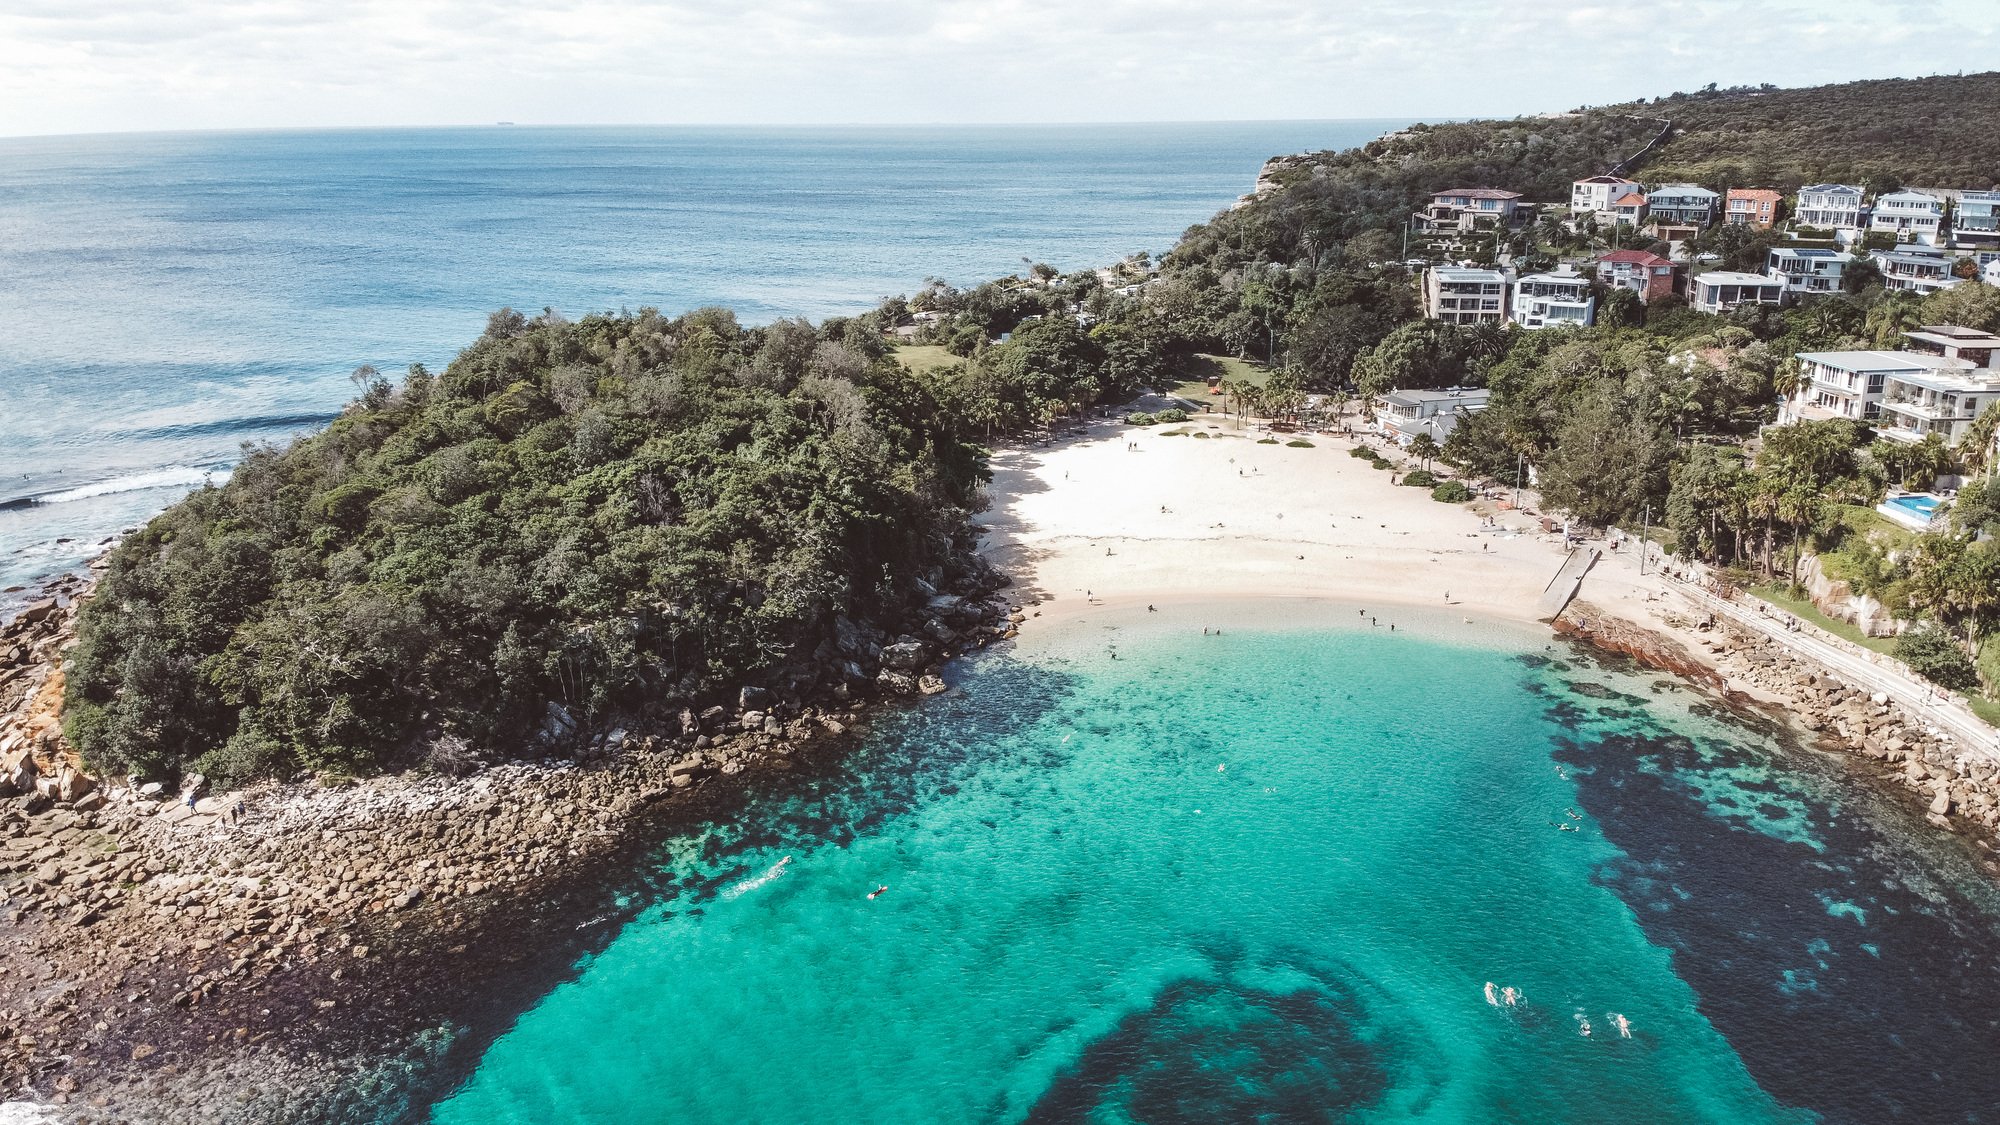 Shelly Beach by drone - Manly - Sydney - New South Wales (NSW) - Australia